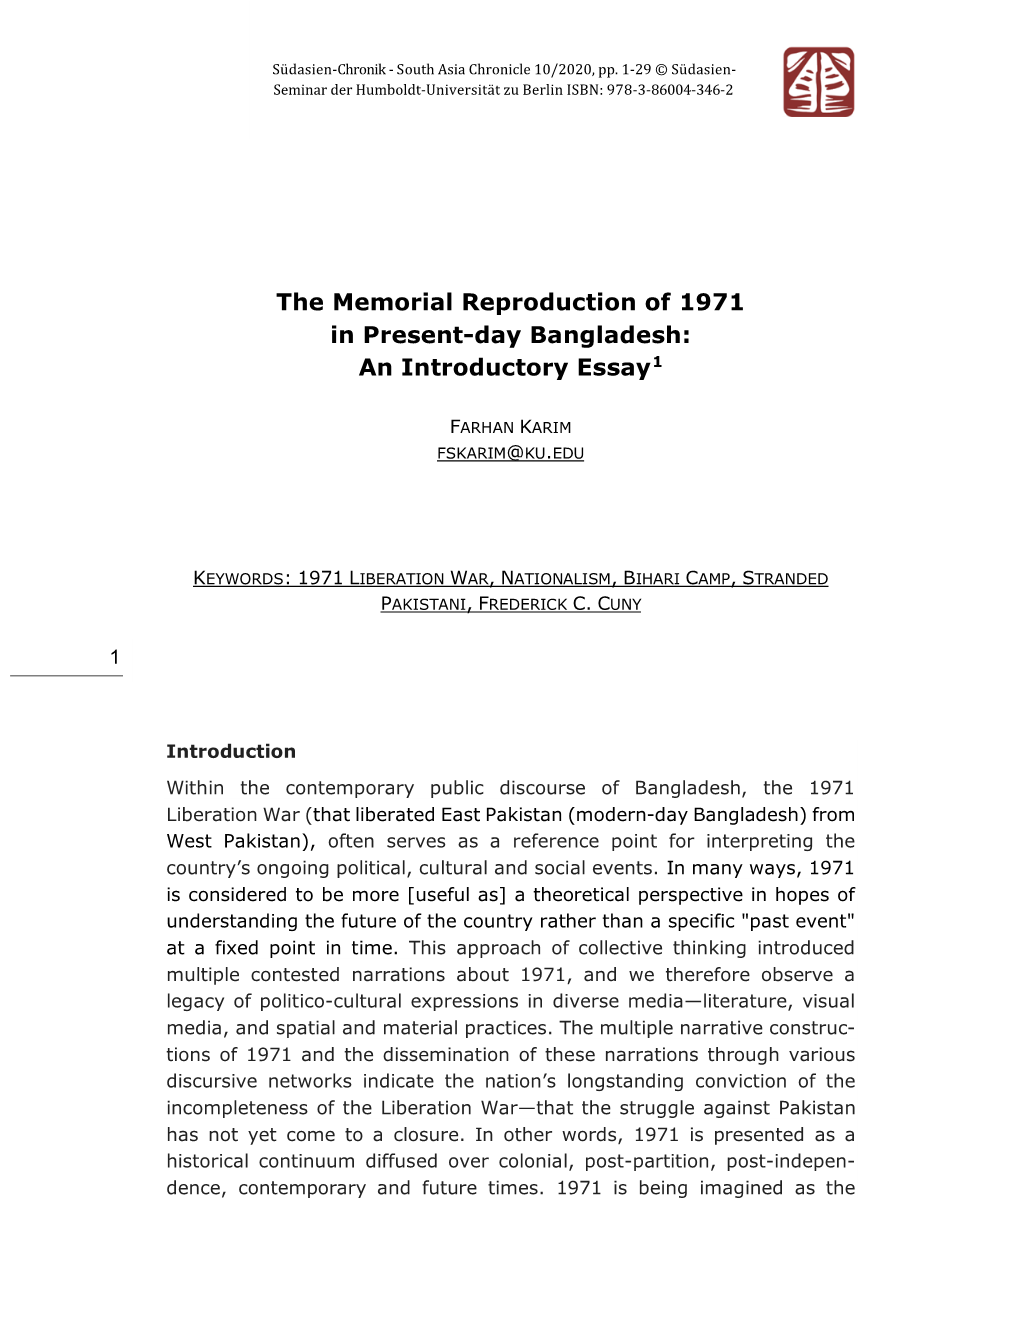 The Memorial Reproduction of 1971 in Present-Day Bangladesh: an Introductory Essay1